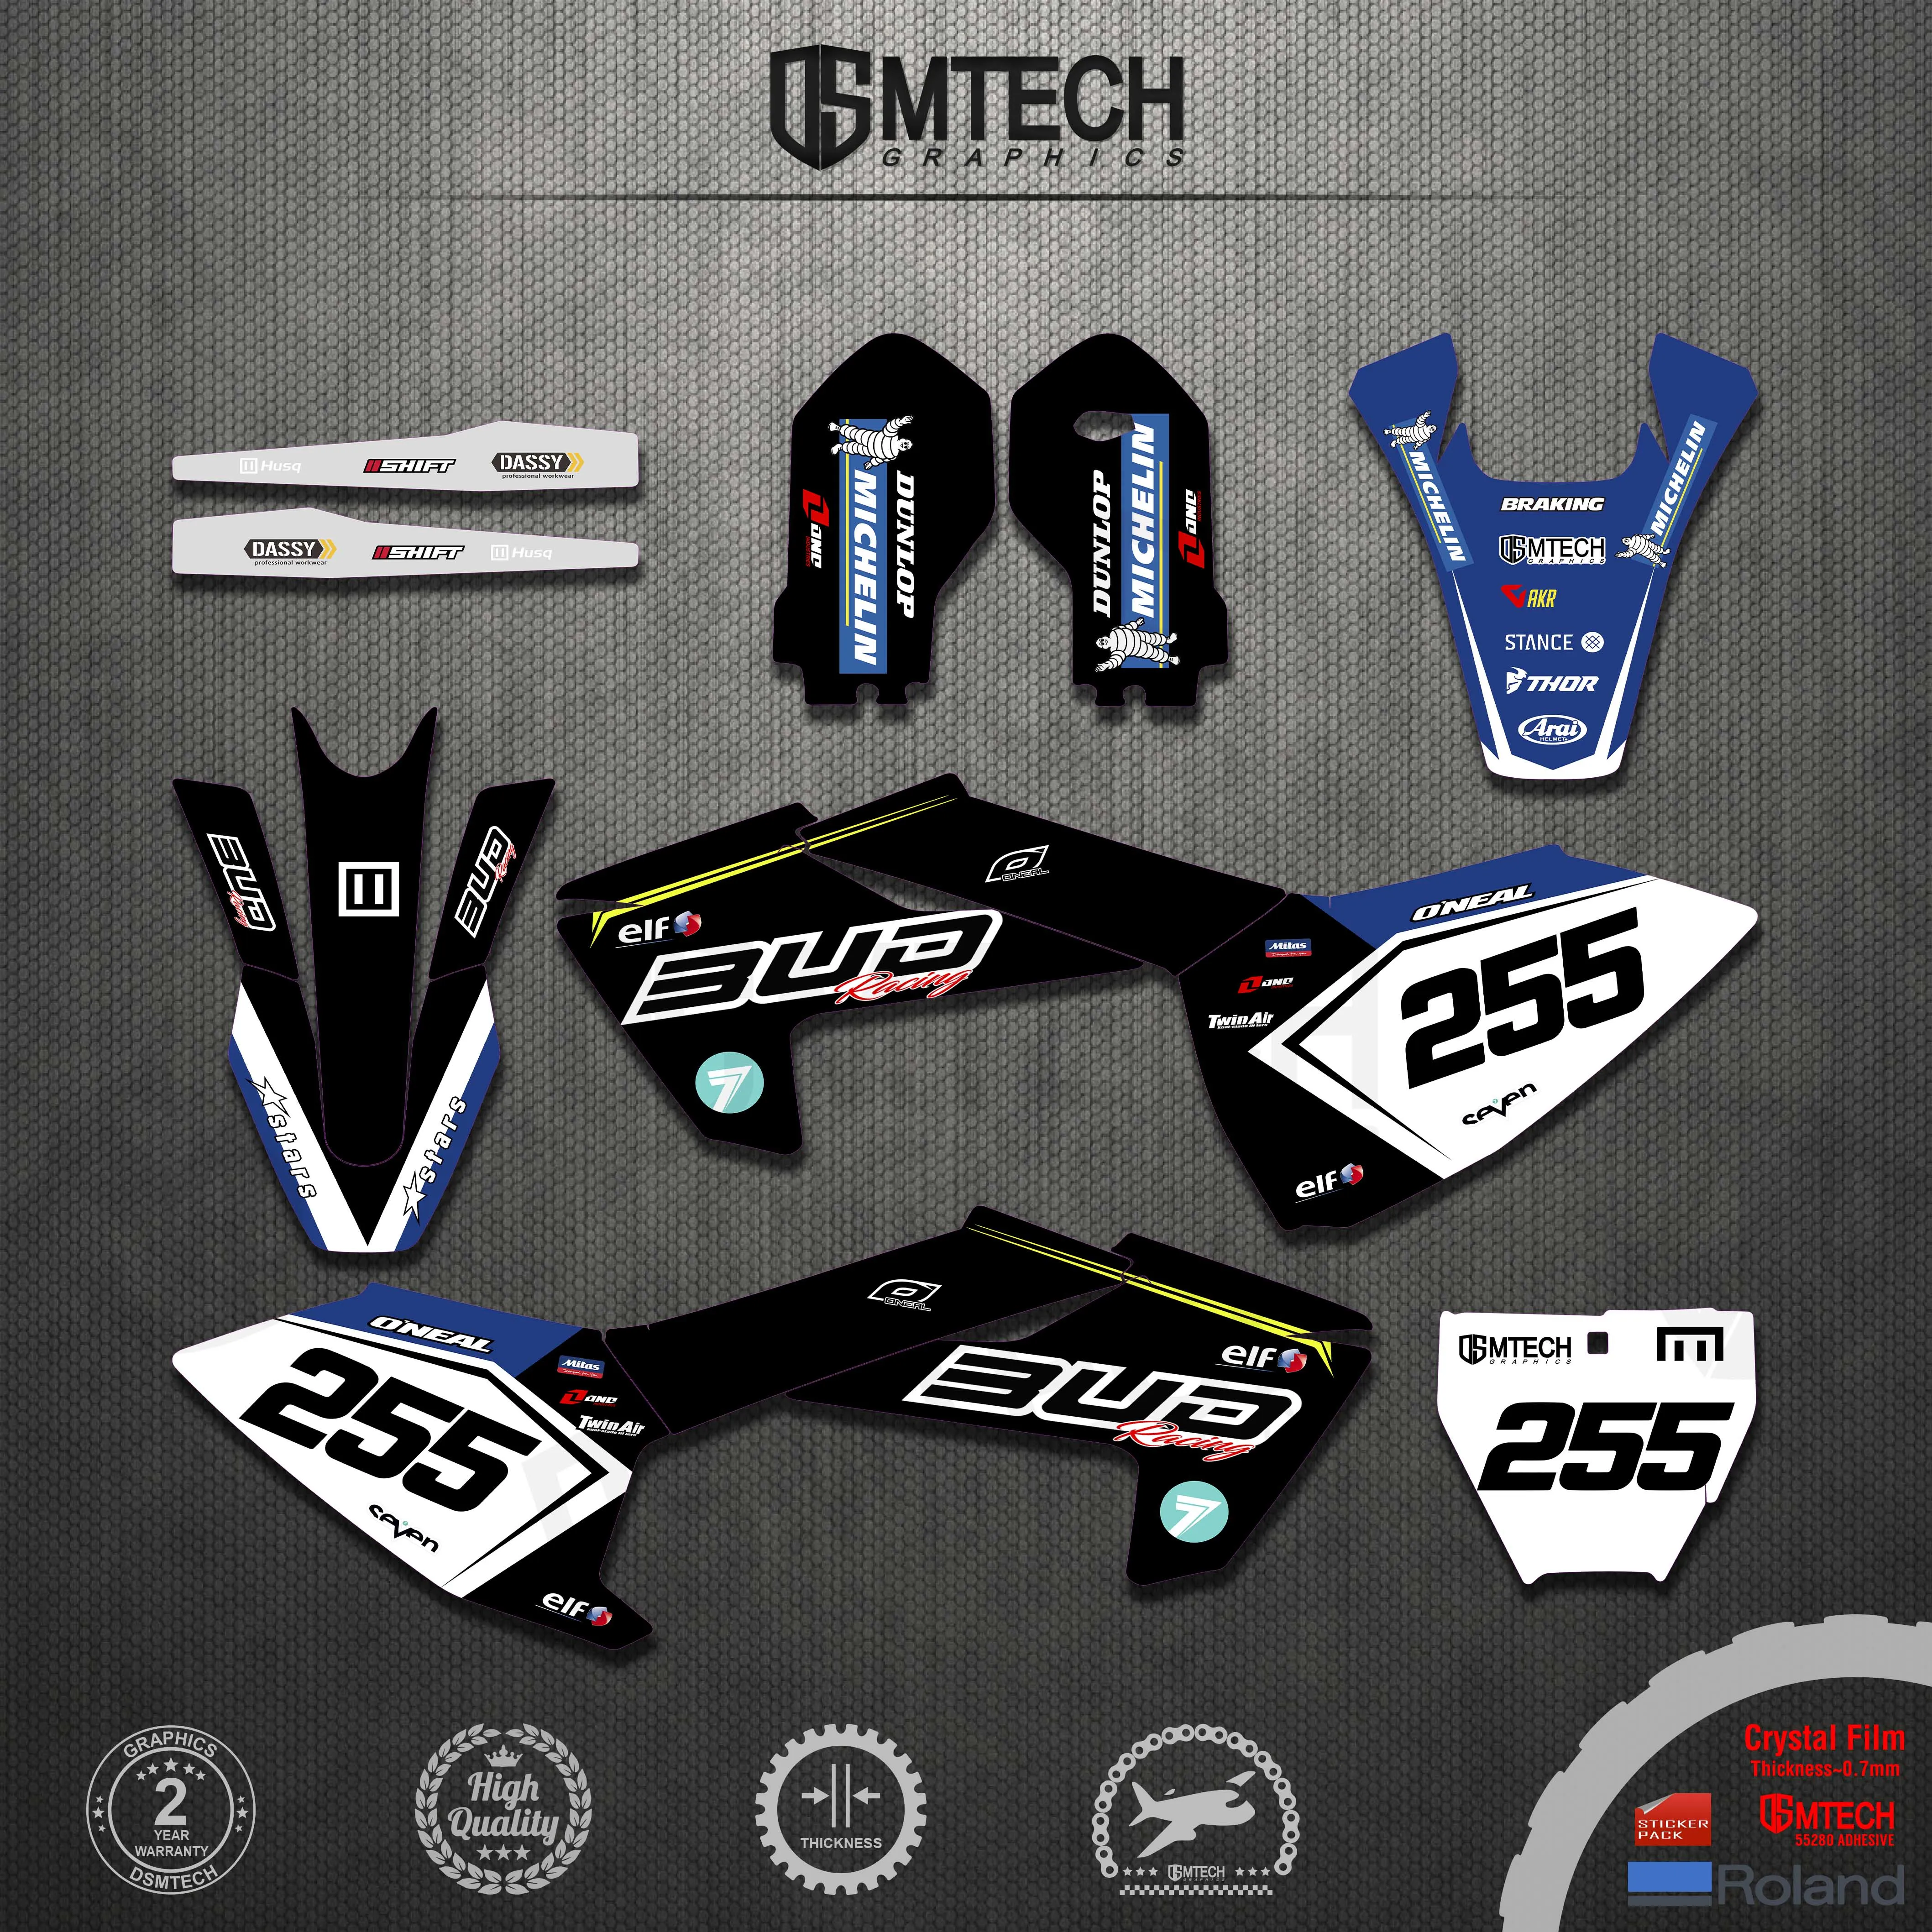 DSMTECH Motorcycle Team TC85 Graphic Decal Sticker Deco Kit For Husqvarna TC 85 2018 2019 2020 2021 2022